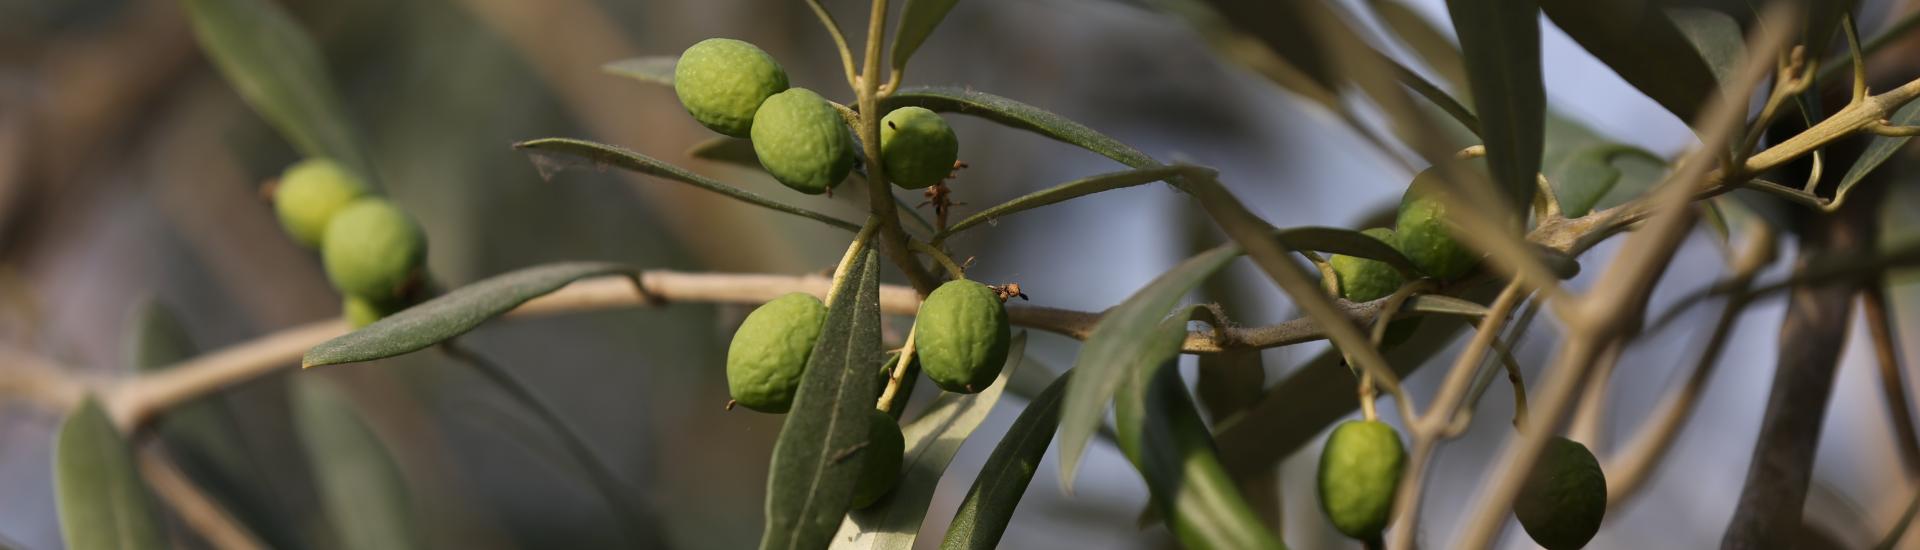 Plant an olive tree in your garden